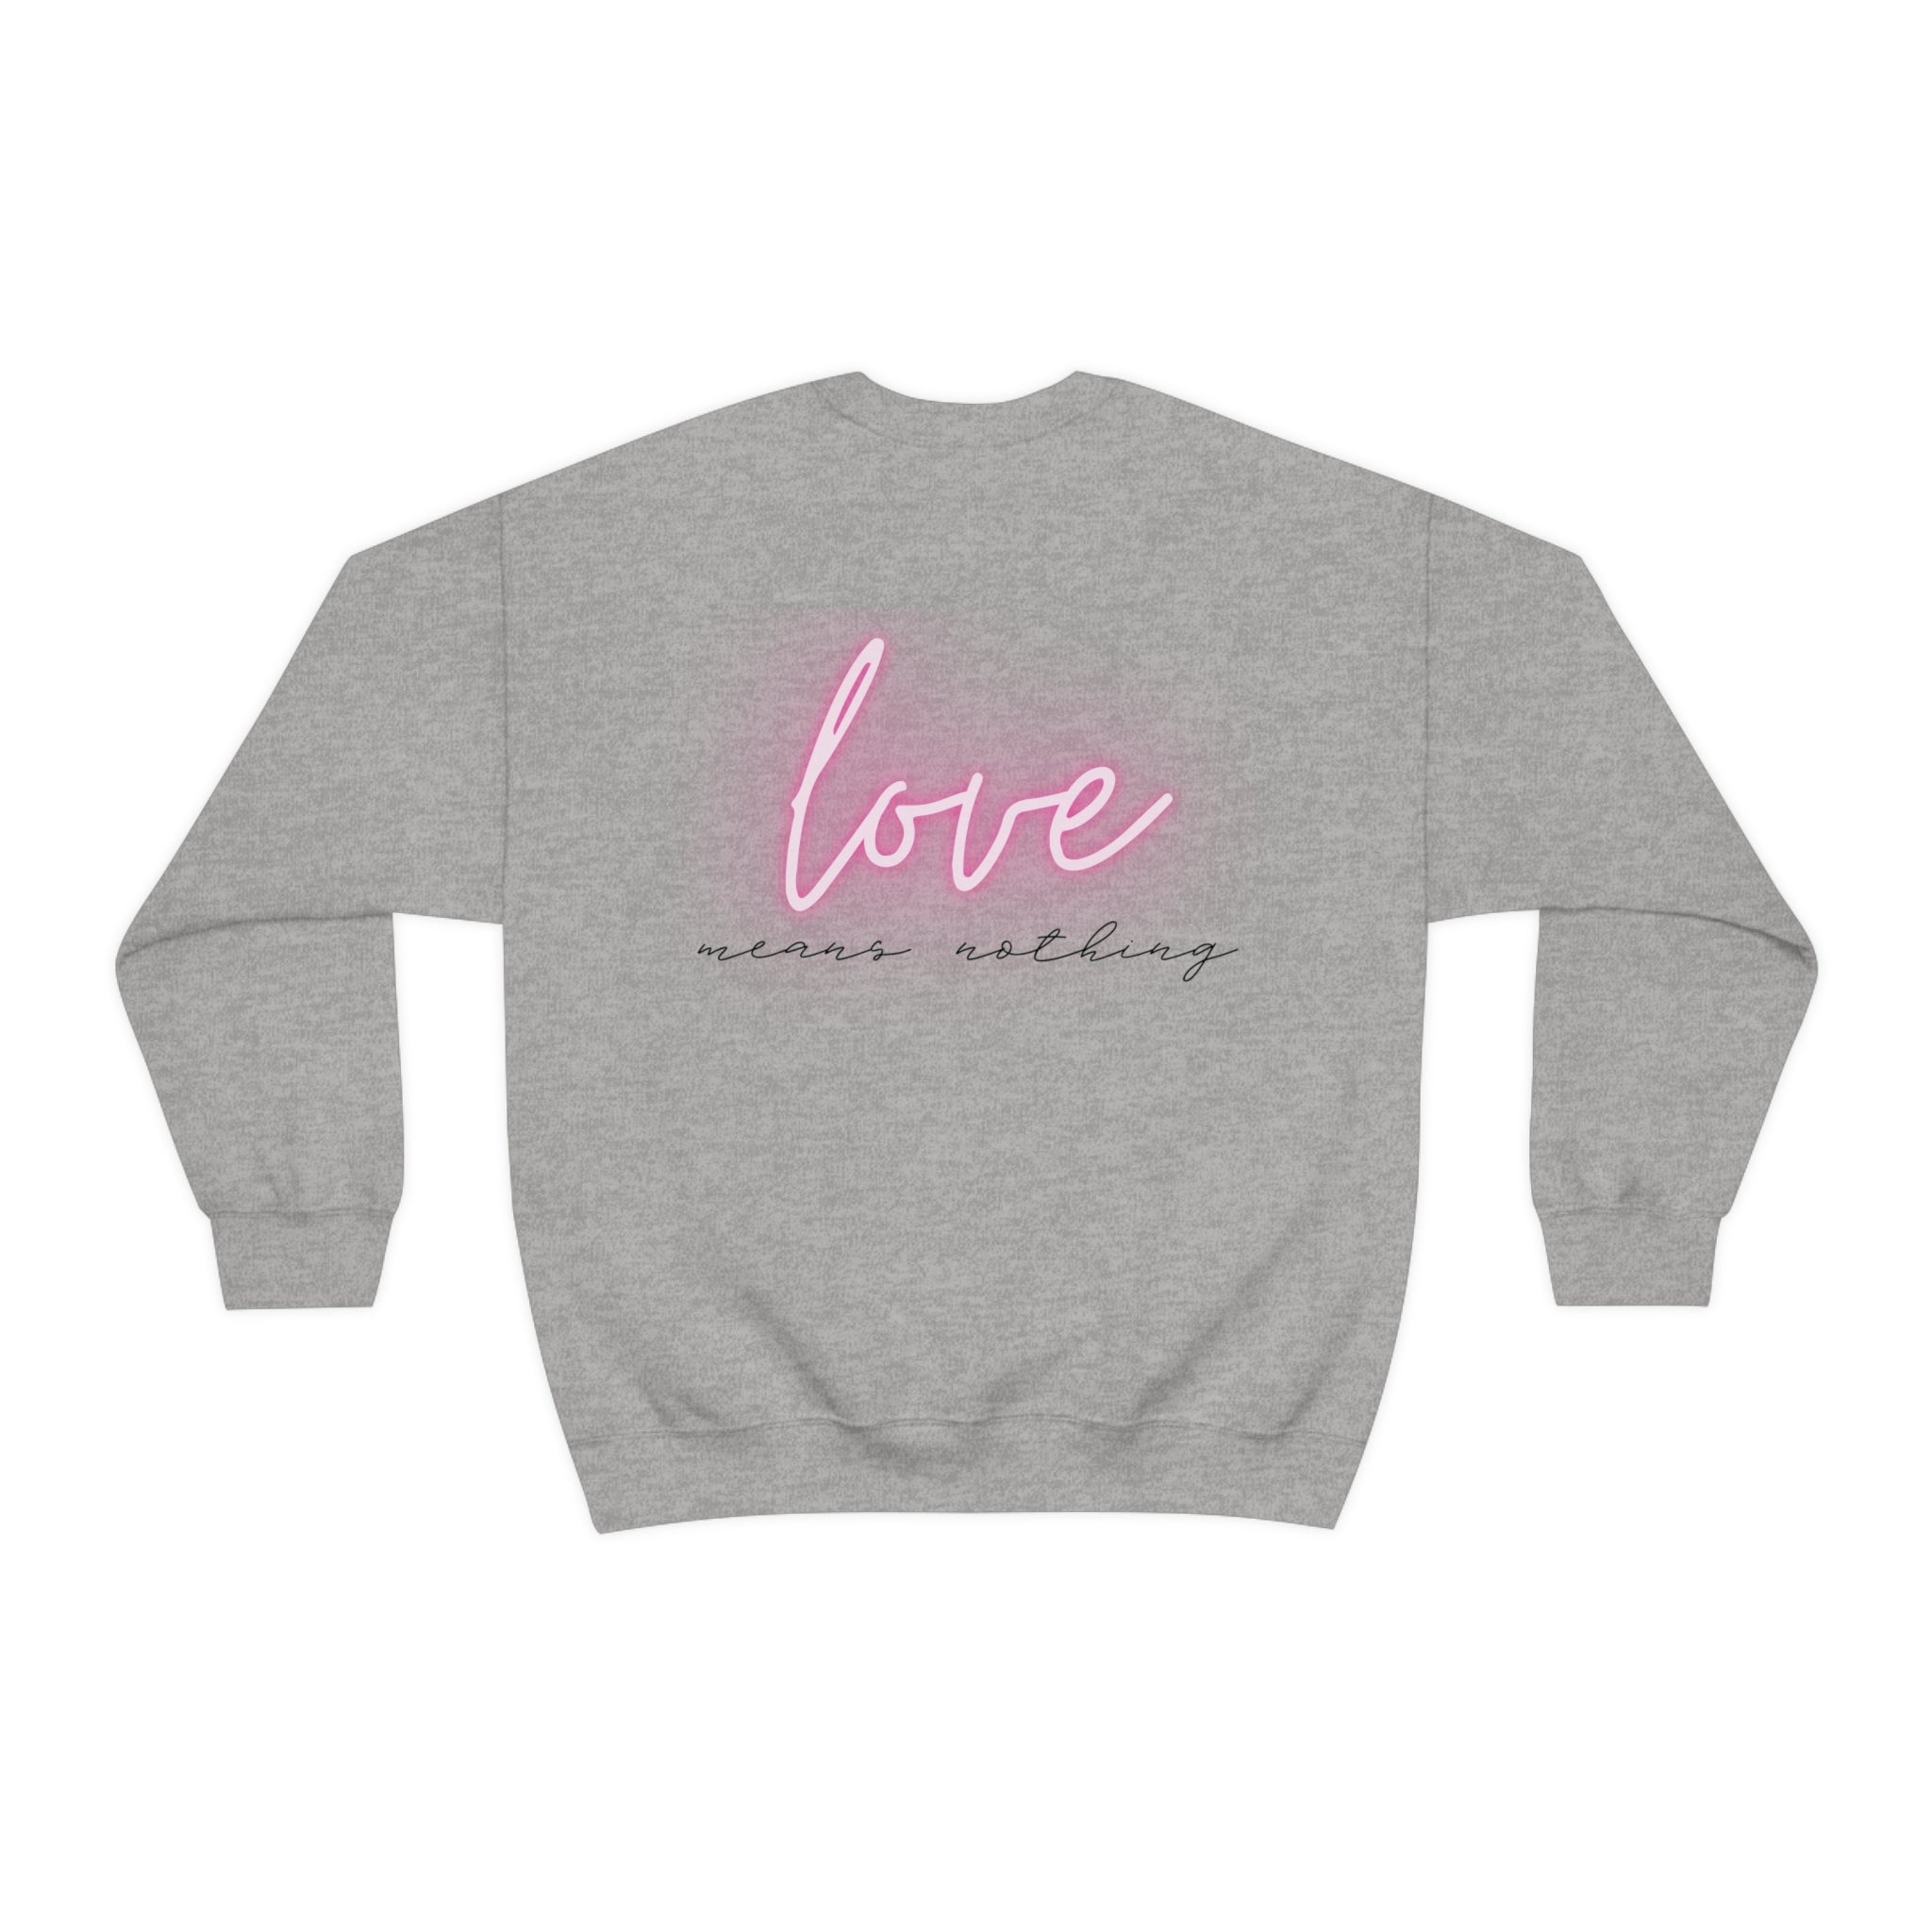 Tennis - Love means nothing Crewneck